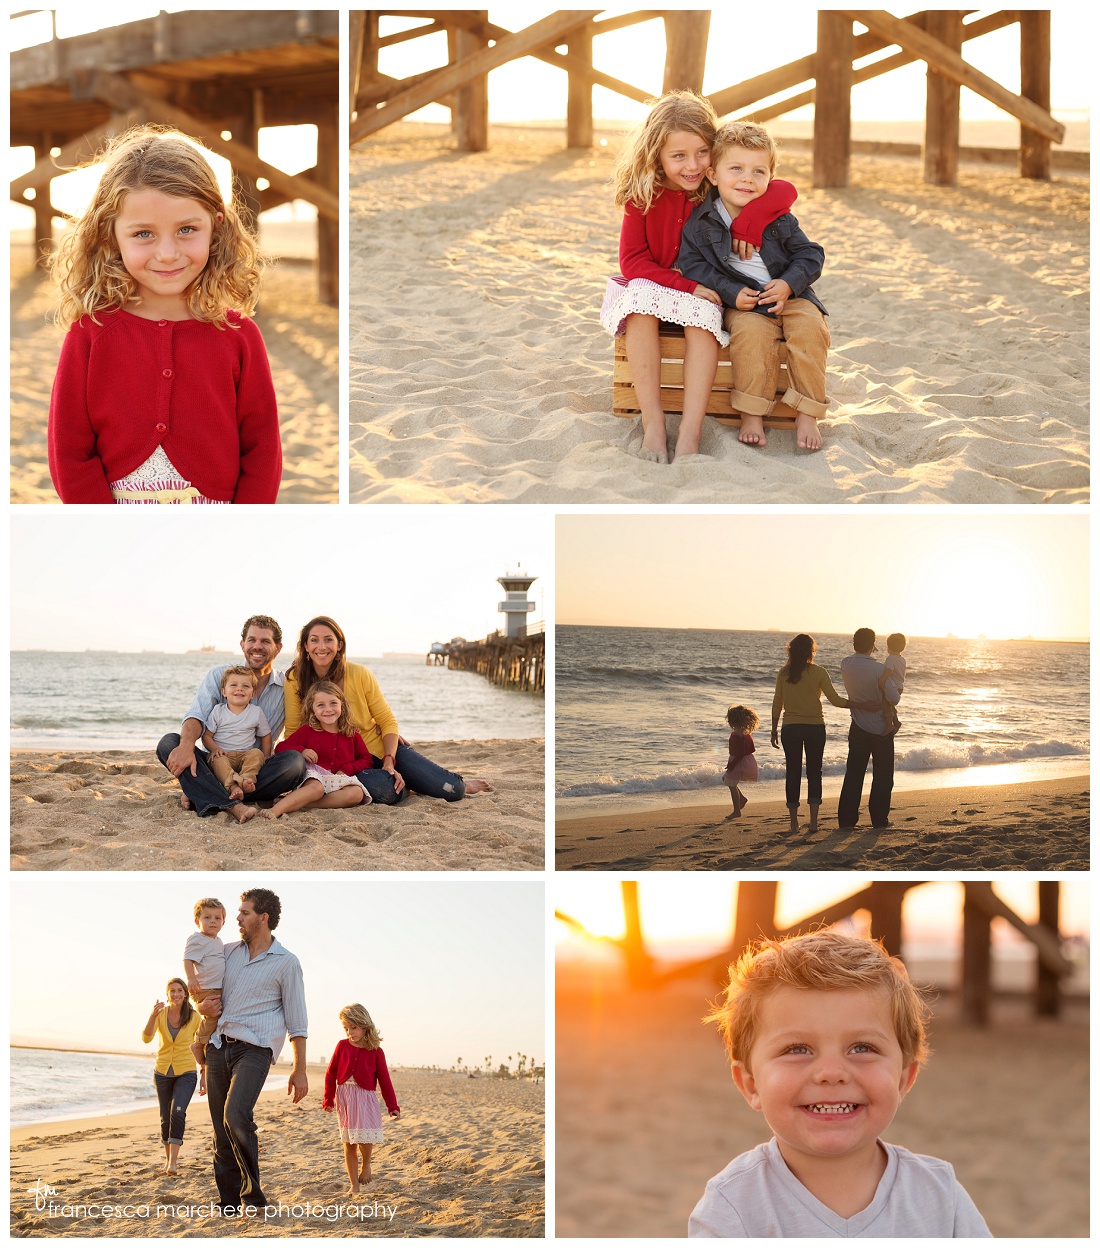 Southern California family session - Francesca Marchese Photography